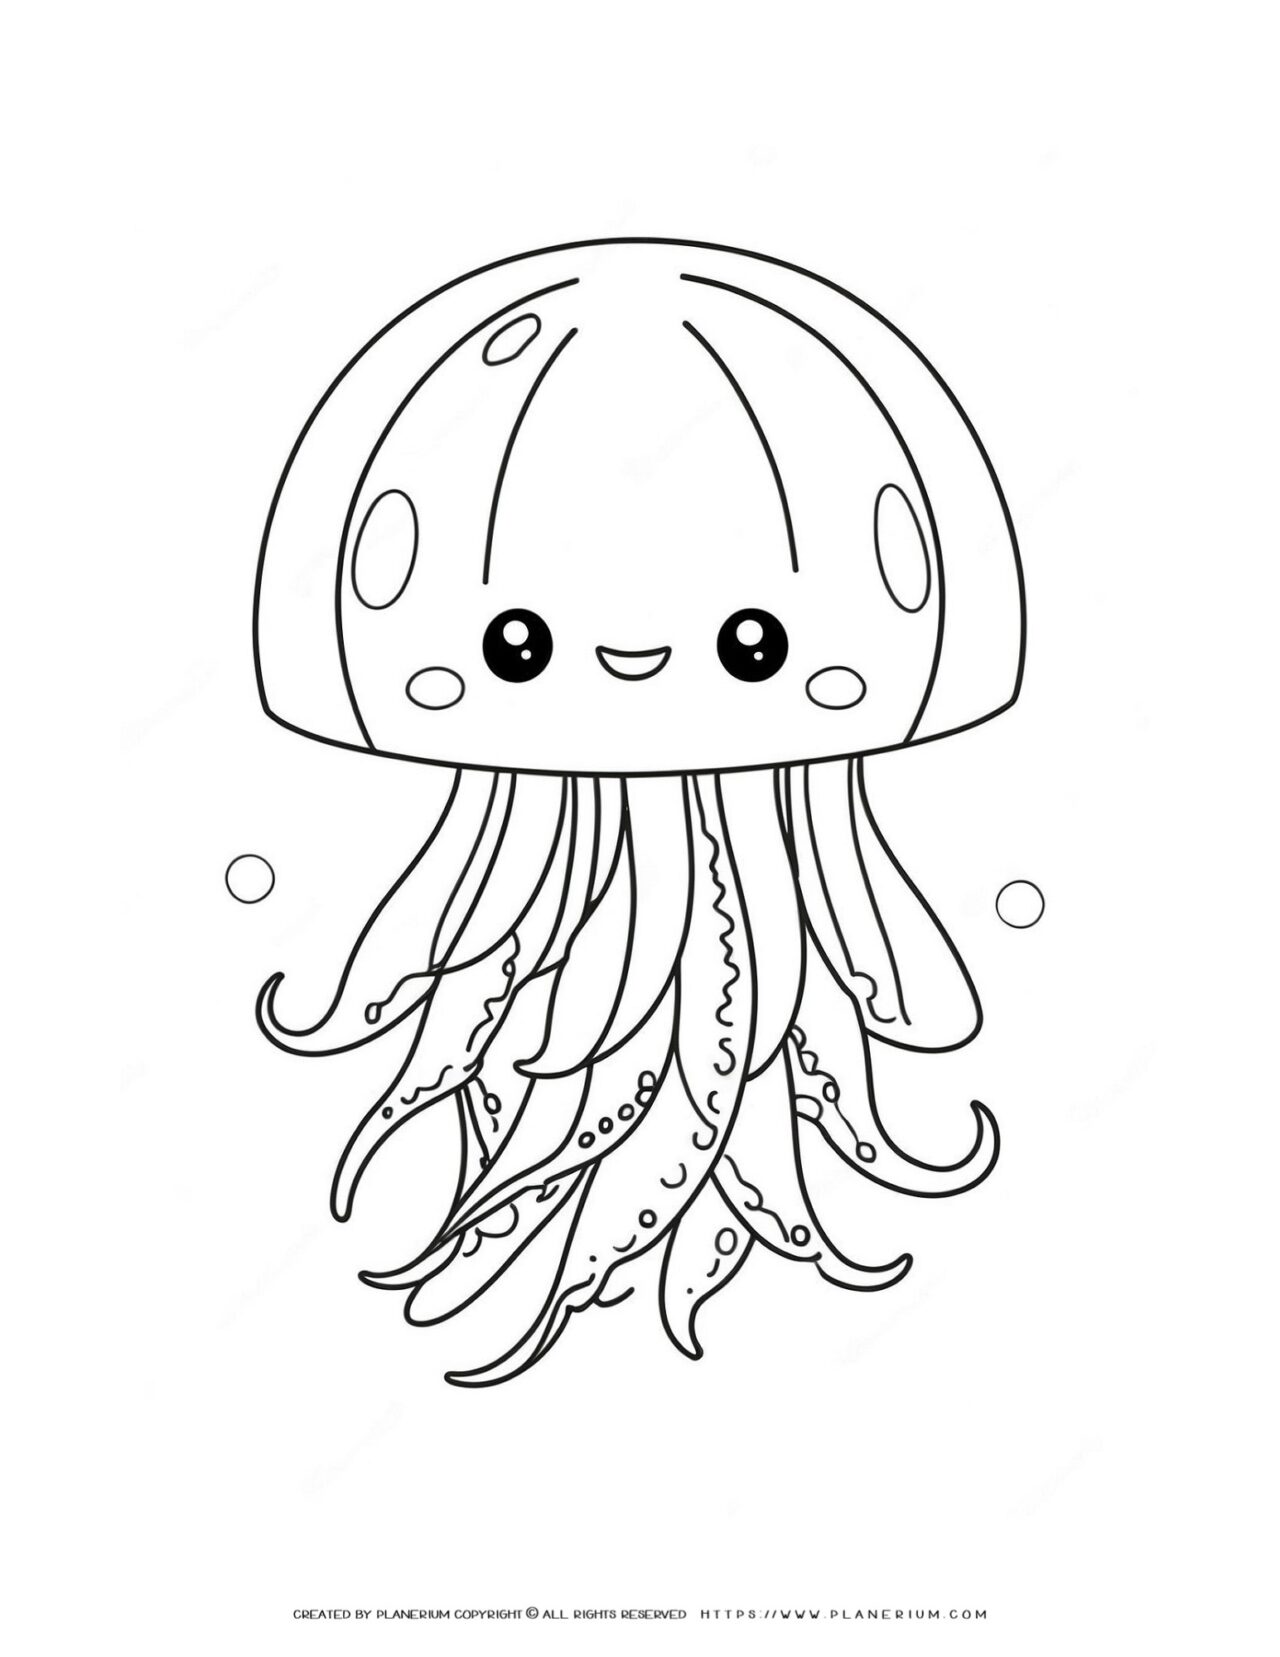 Cute-cartoon-jellyfish-coloring-page-illustration